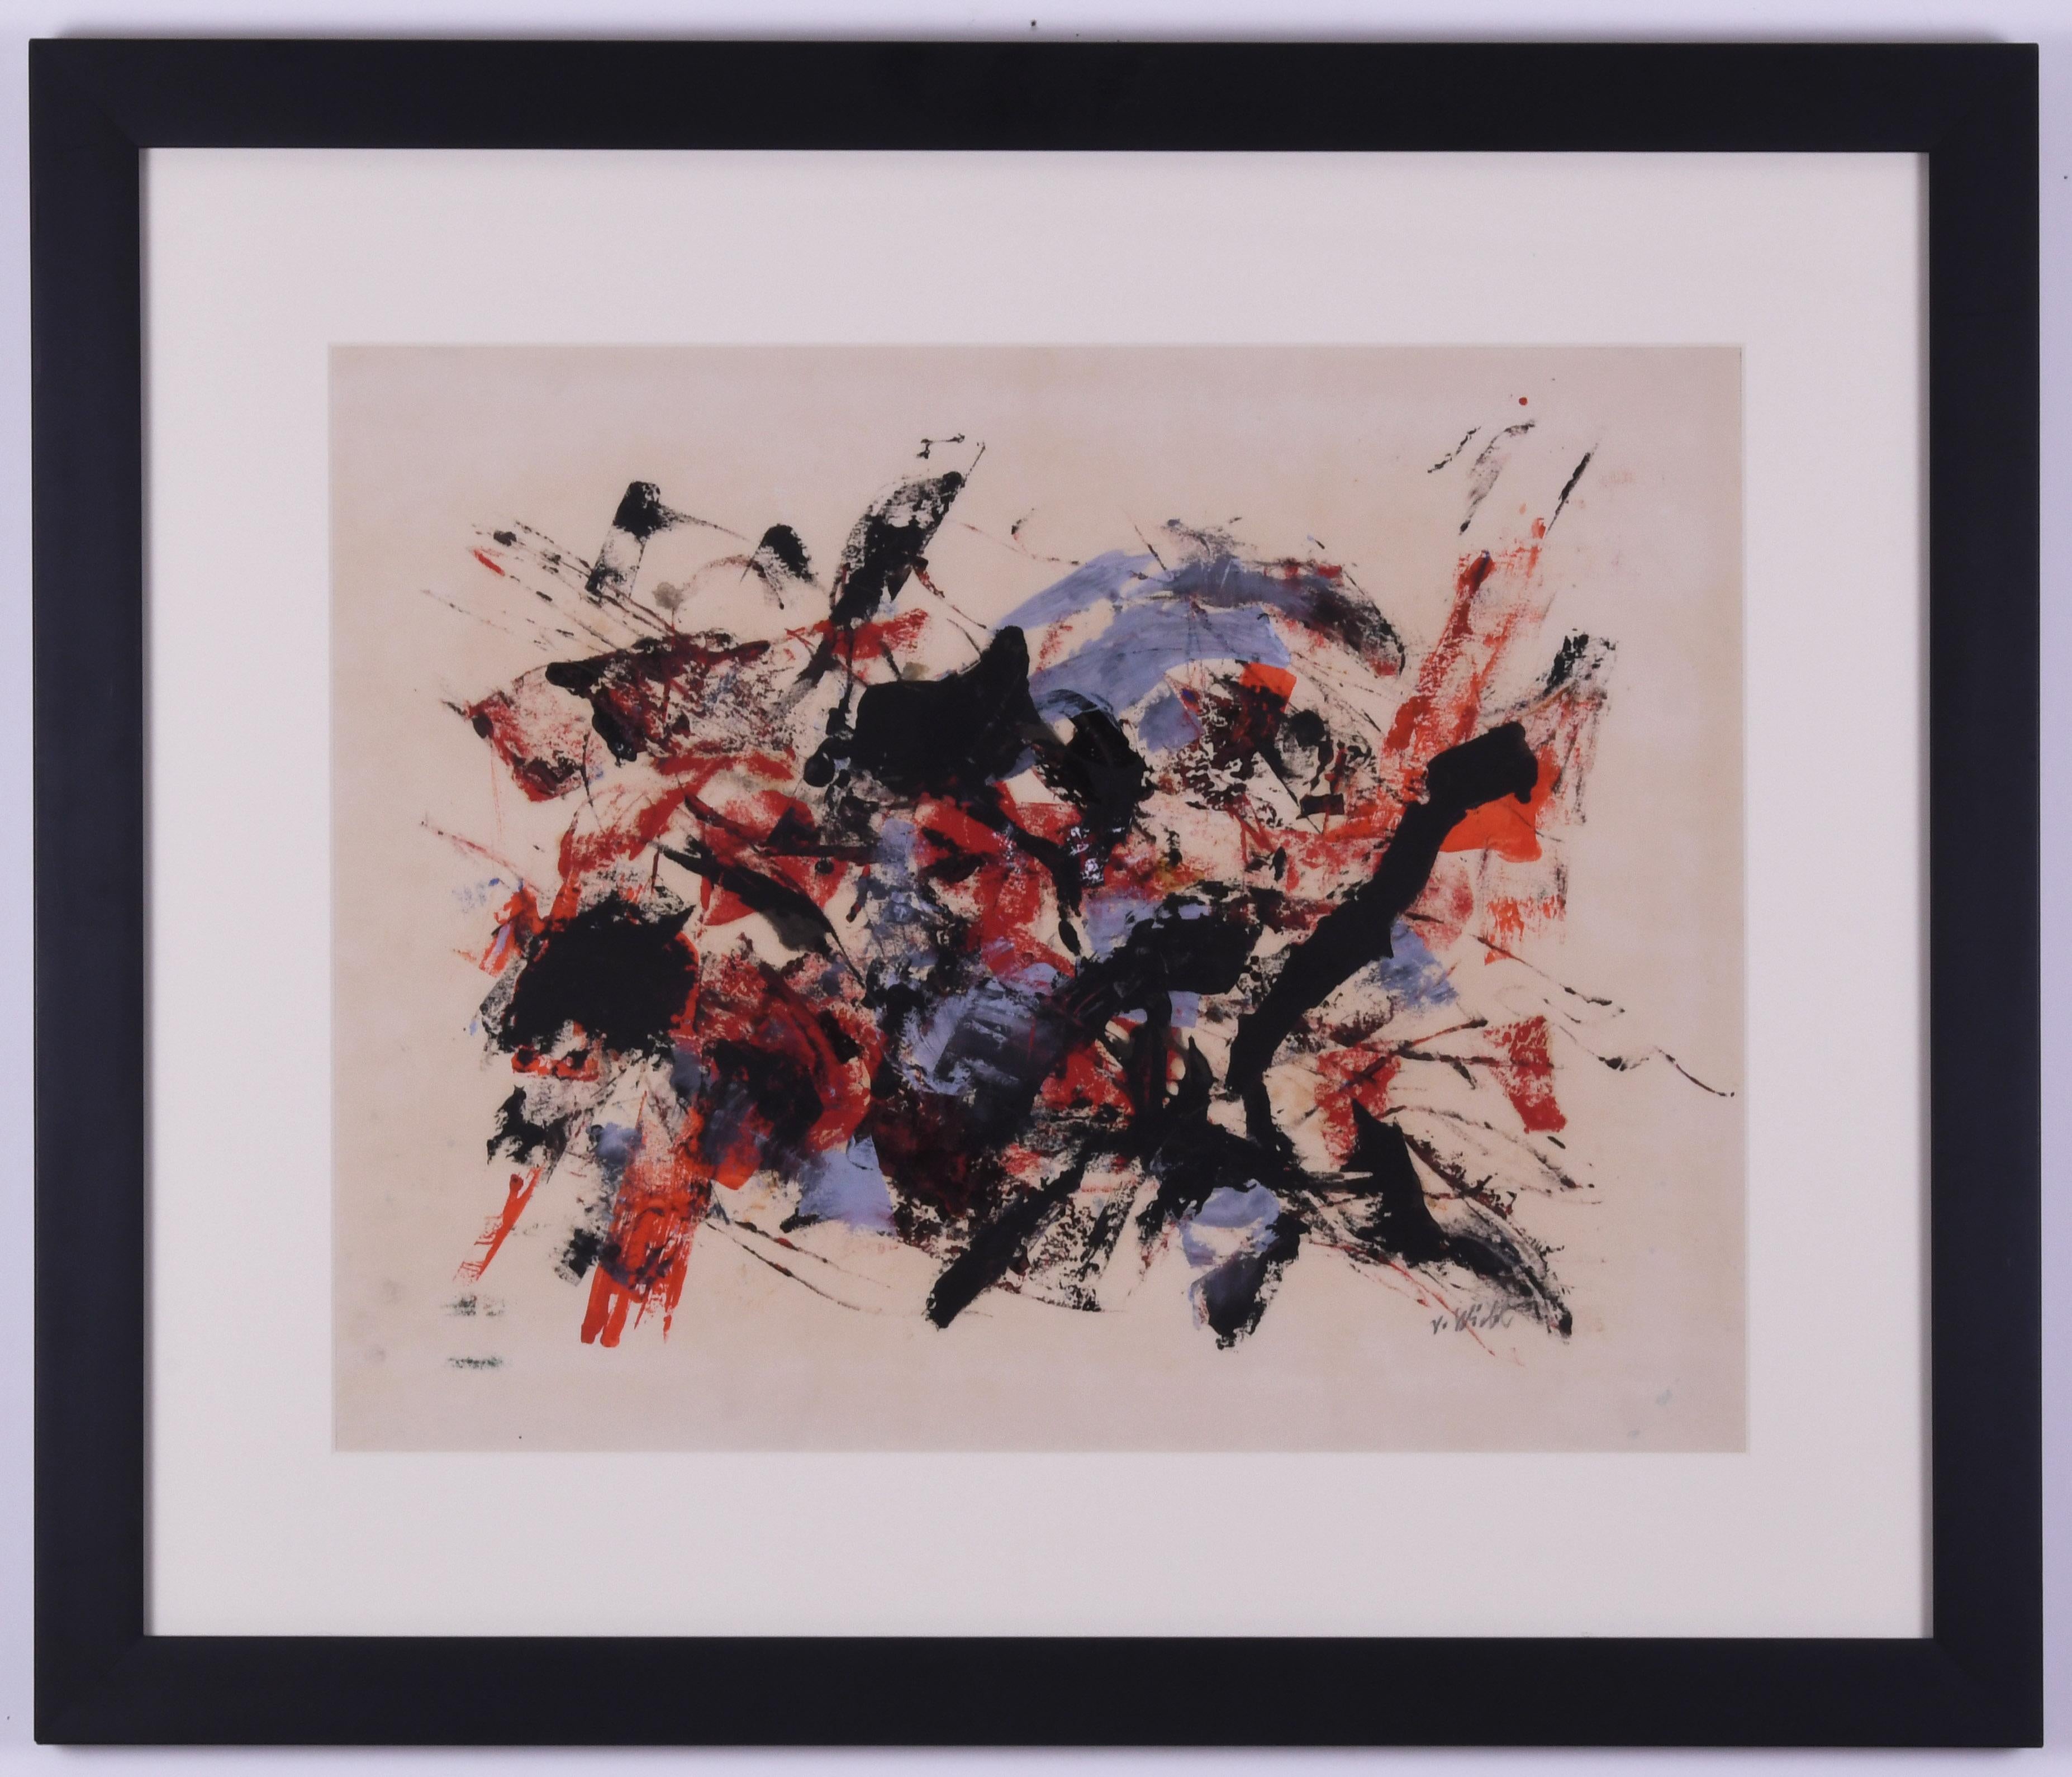 Untitled Abstrraction
Gouache, watercolor and pigments on paper, c. 1960
Signed lower right in pencil (see photo)
Image: 17 x 22 inches
Sheet: 25 1/4 x 29 3/4 inches
Frame: 25 1/4 x 29 3/4 inches
Archival framing with OP3 Acrylic

